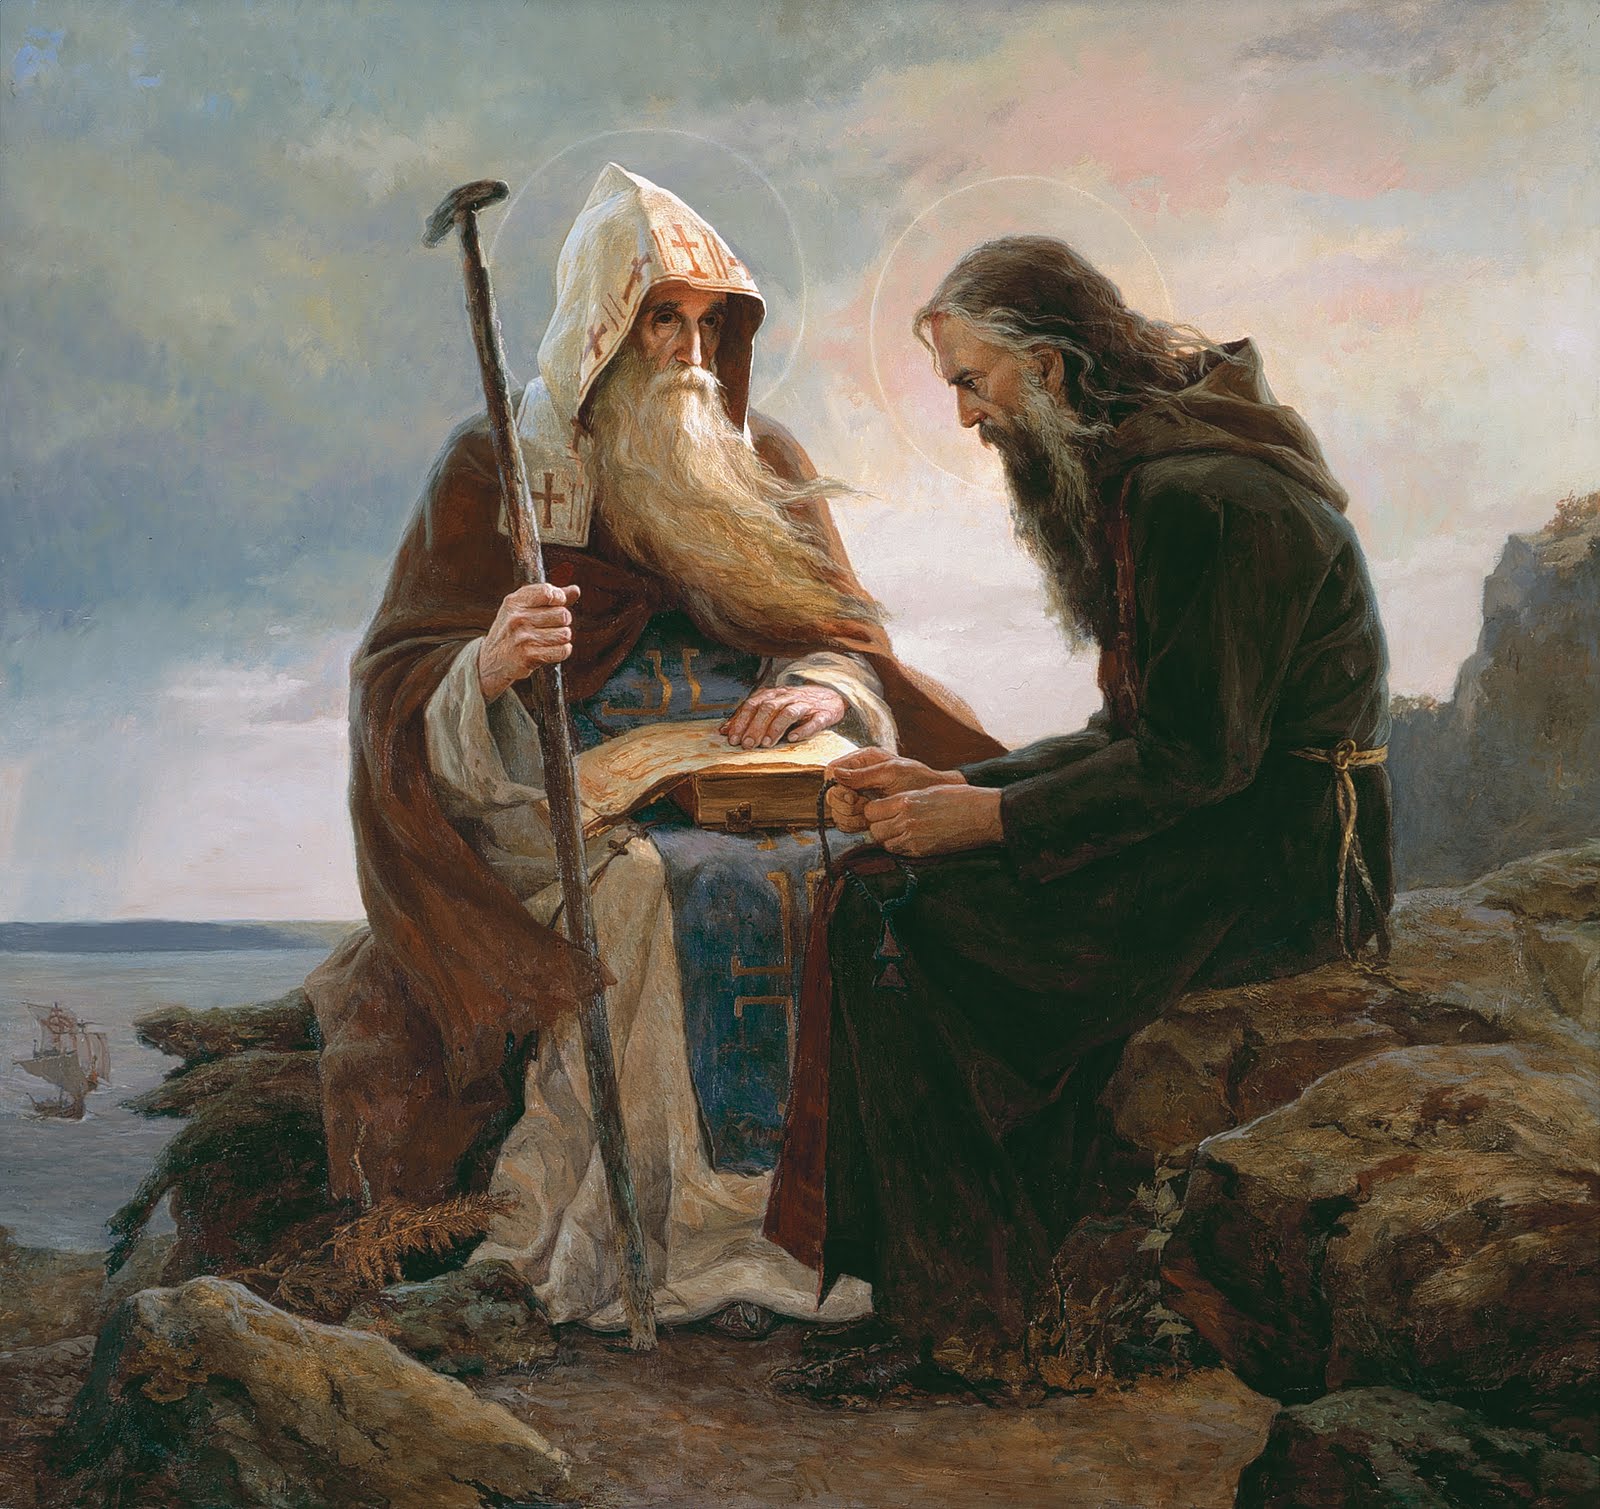 In Your Patience Possess Ye Your Souls: A Homily on Sts. Anthony & Theodosius of the Kiev Caves